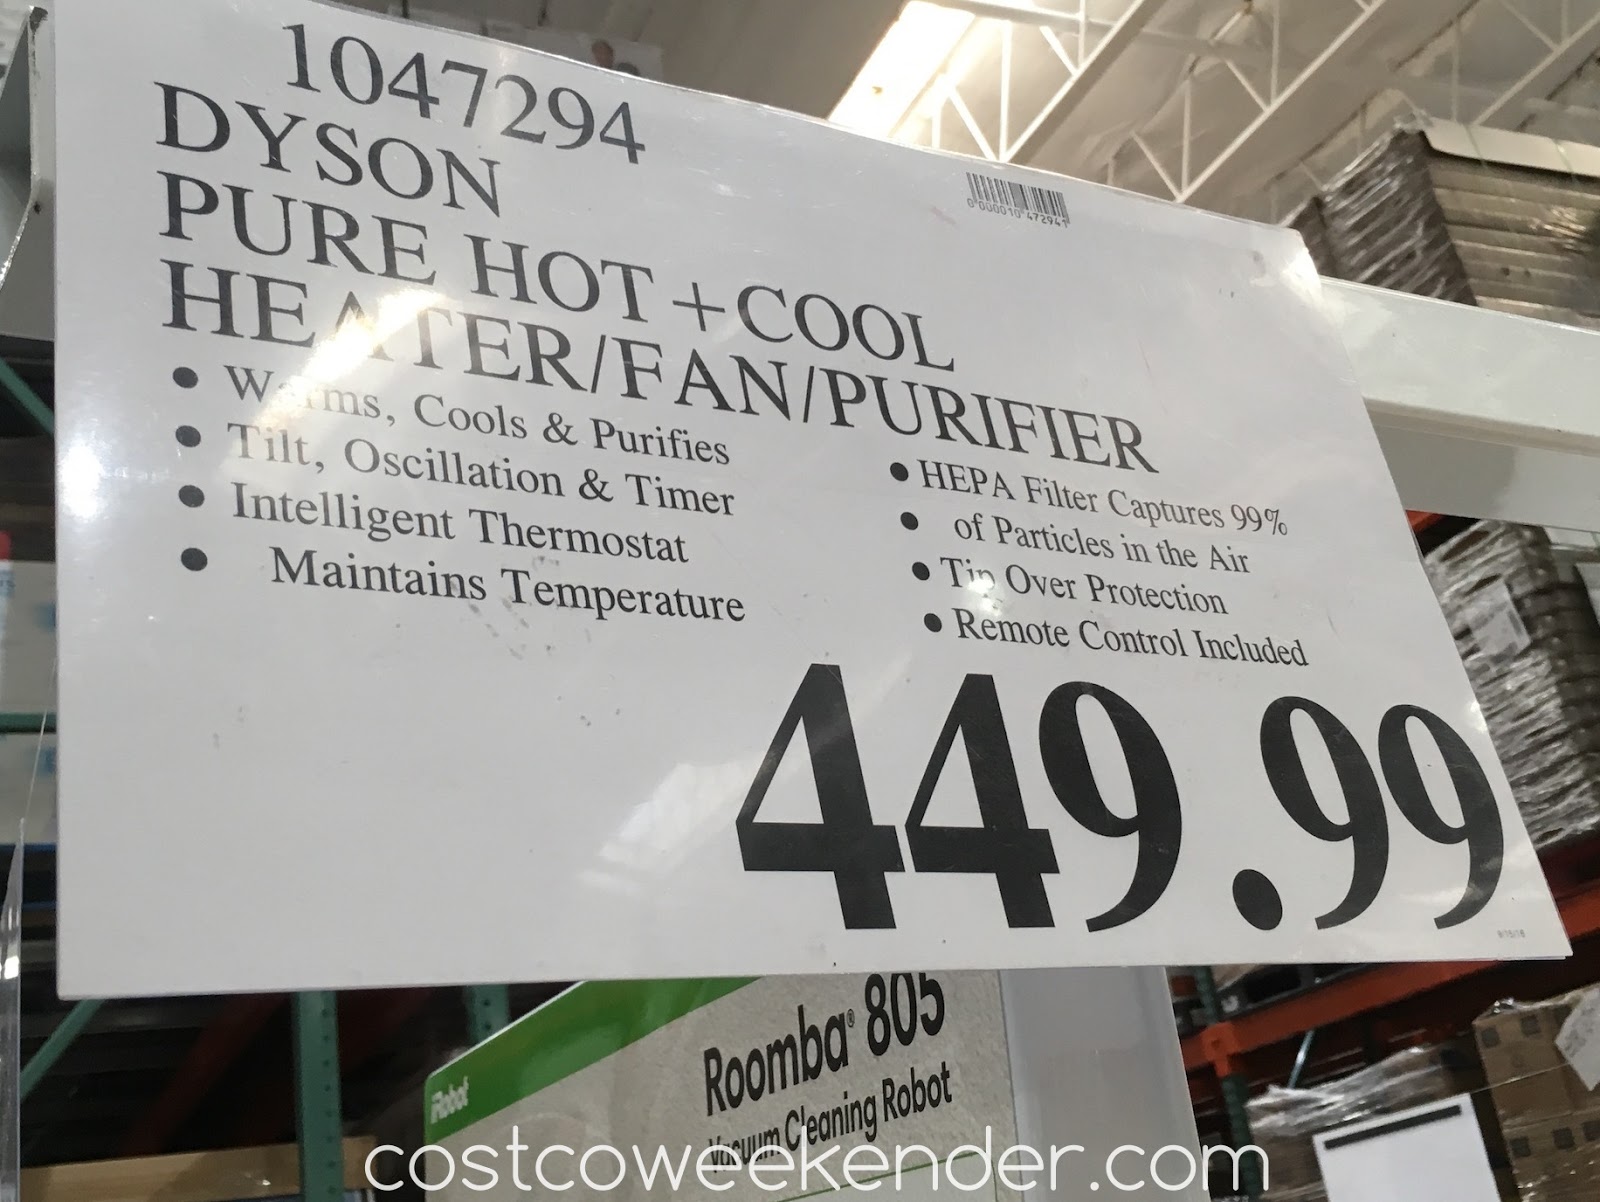 Dyson Pure Hot + Cool Link Purifier Costco Weekender